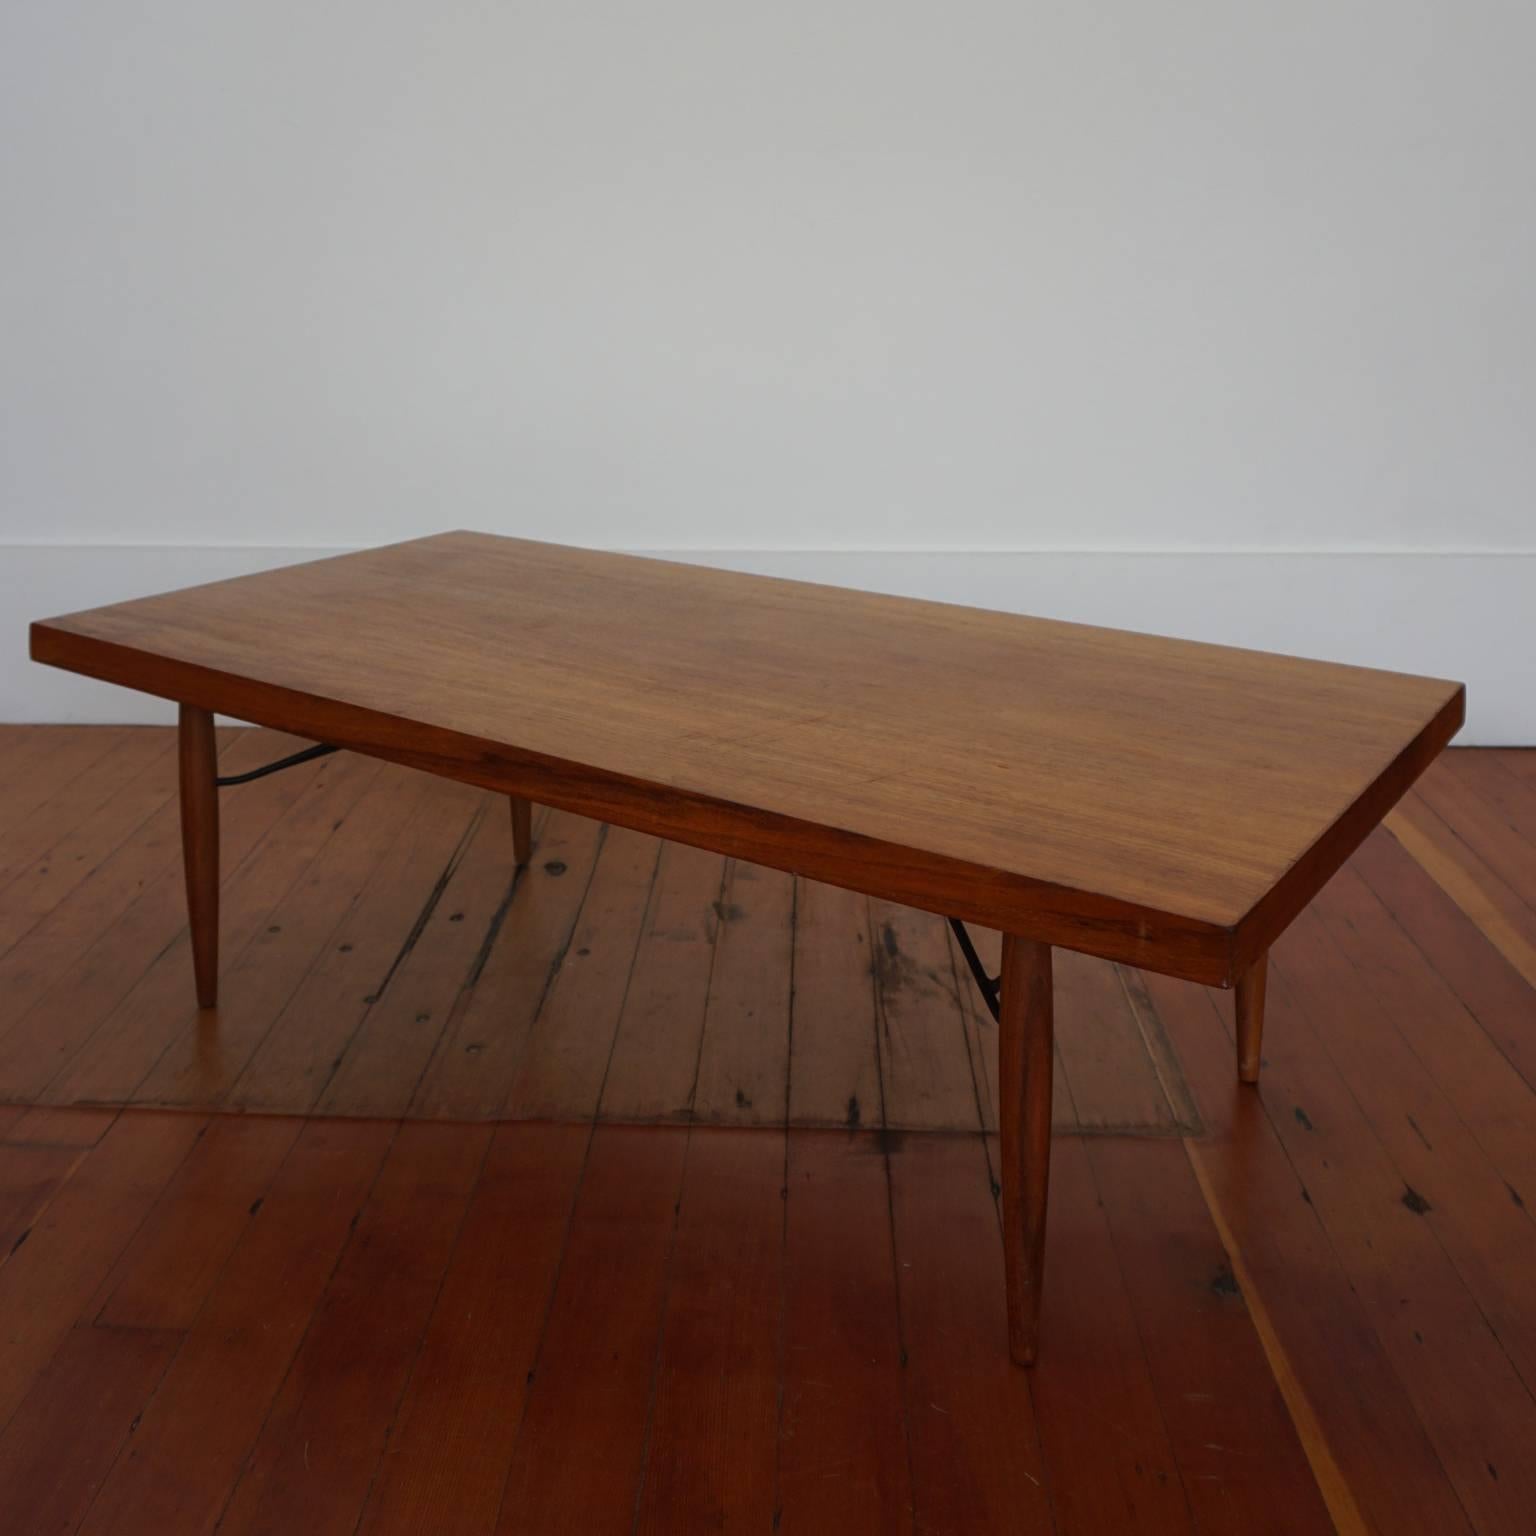 1950s iron and mahogany table by Luther Conover, with original finish.

Conover was based in the San Francisco Bay Area. His furniture was produced in his workshop in very limited numbers. It was marketed through the short-lived Post War